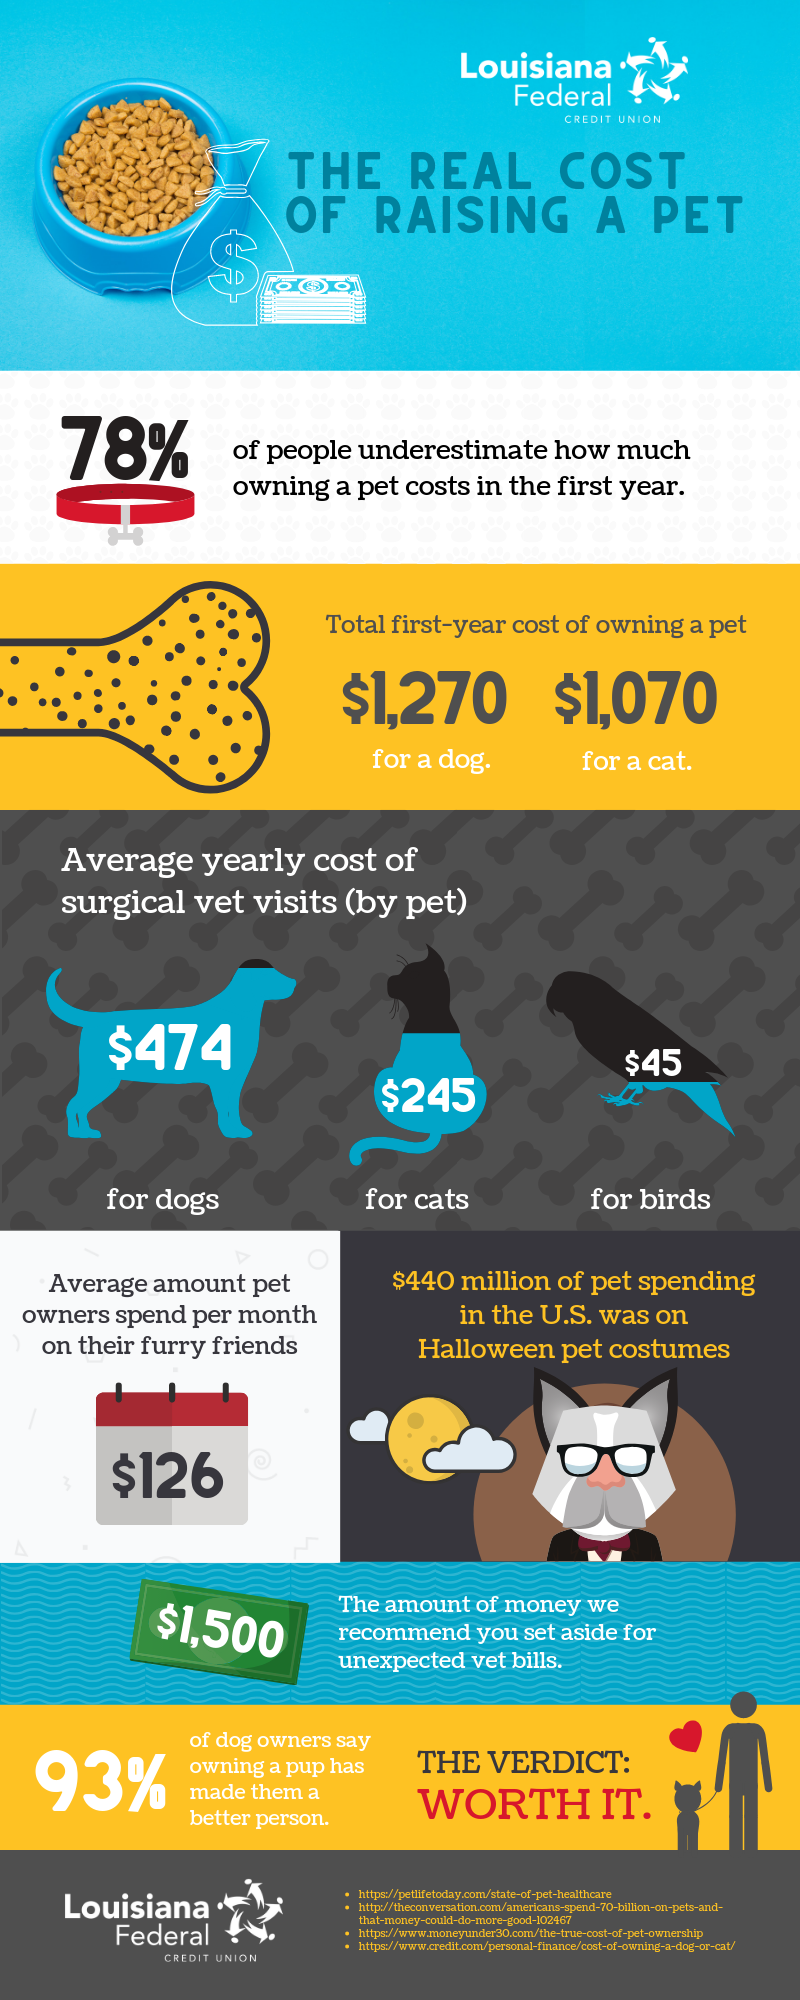 Infographic_The Real Cost of Raising a Pet-1